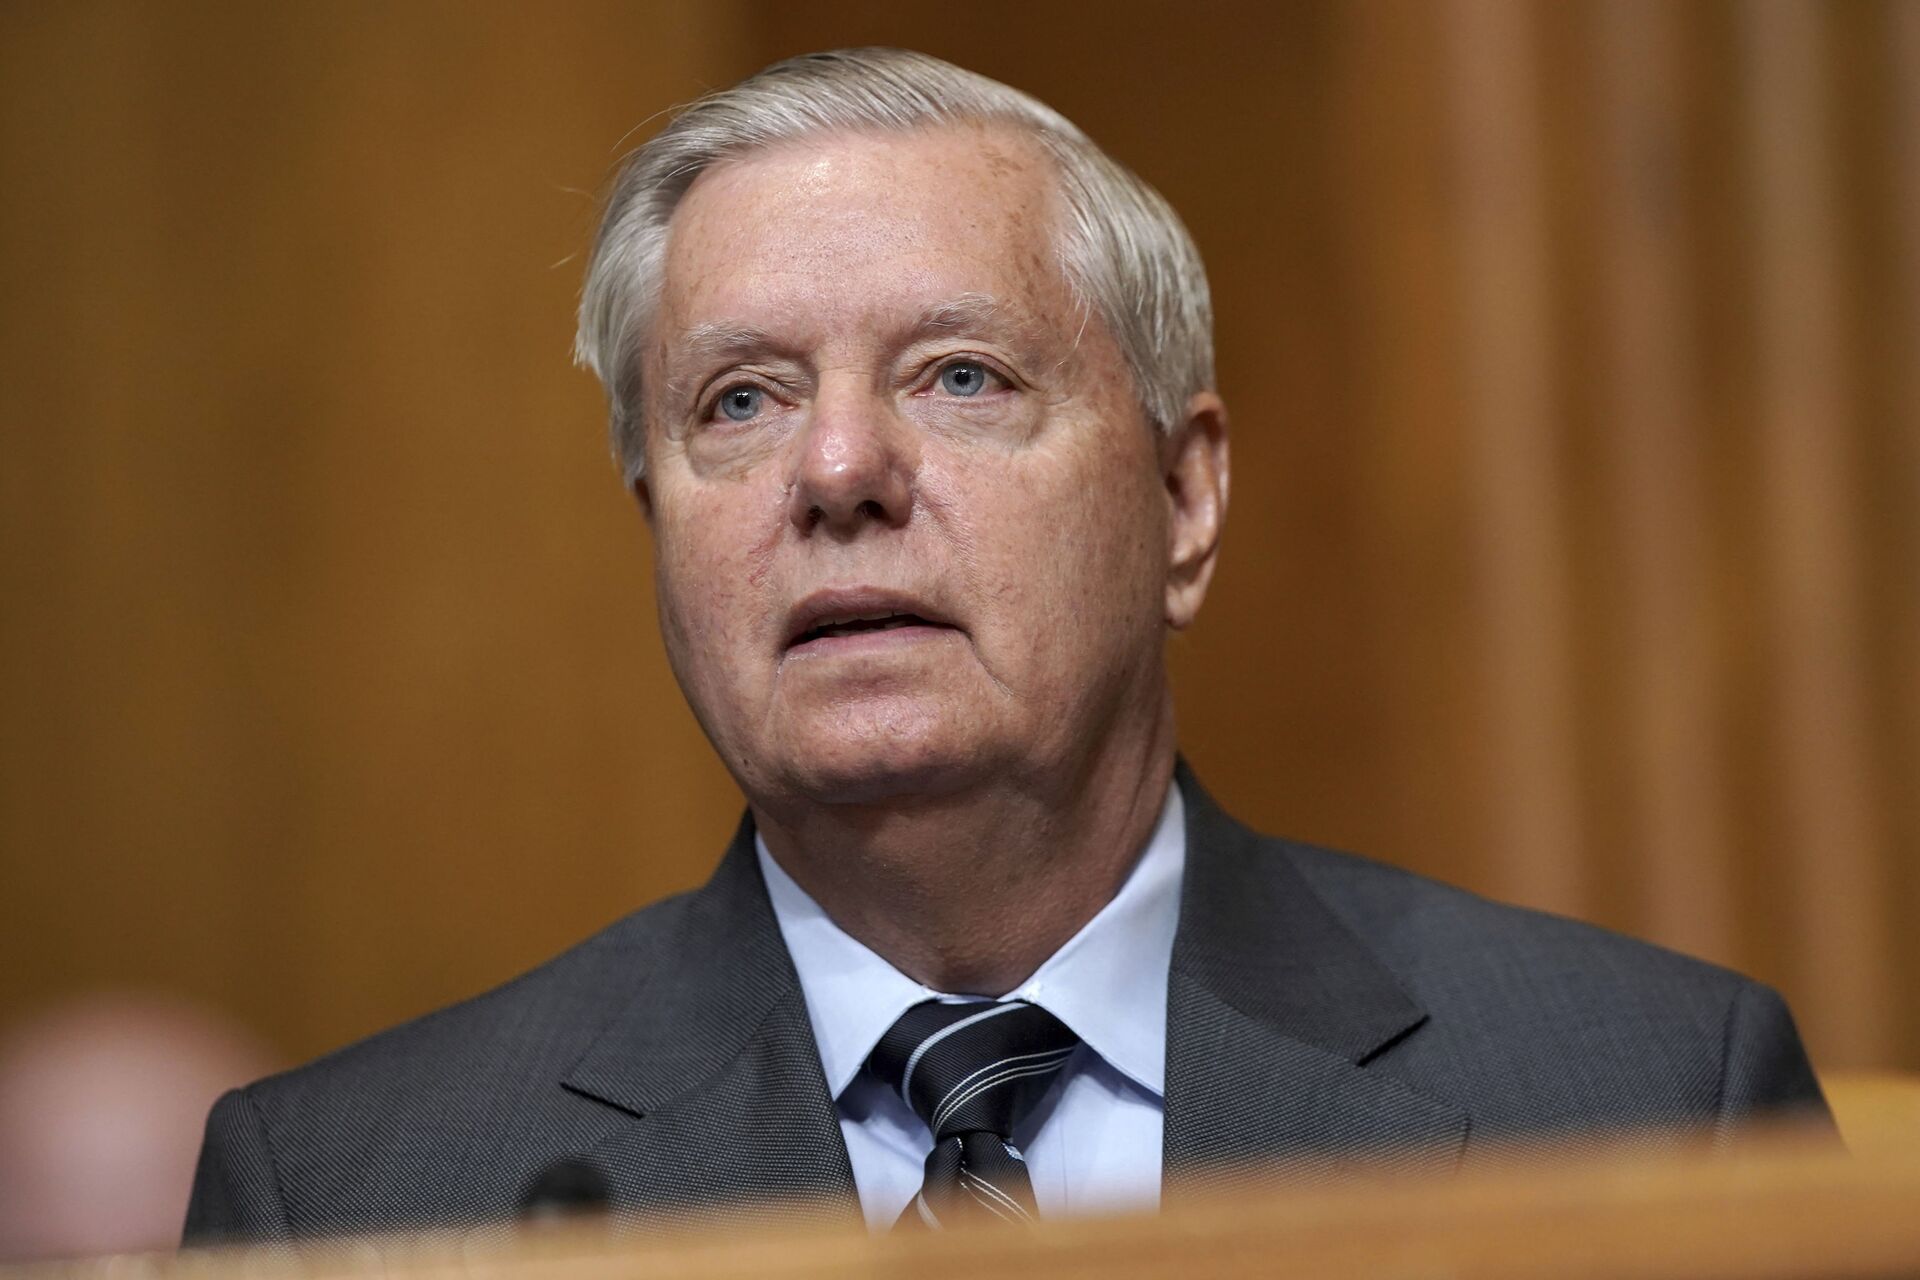 Sen. Lindsey Graham, R-S.C., speaks during a Senate Budget Committee hearing to discuss President Joe Biden's budget request for FY 2022 on Tuesday, June 8, 2021, on Capitol Hill in Washington - Sputnik International, 1920, 07.09.2021